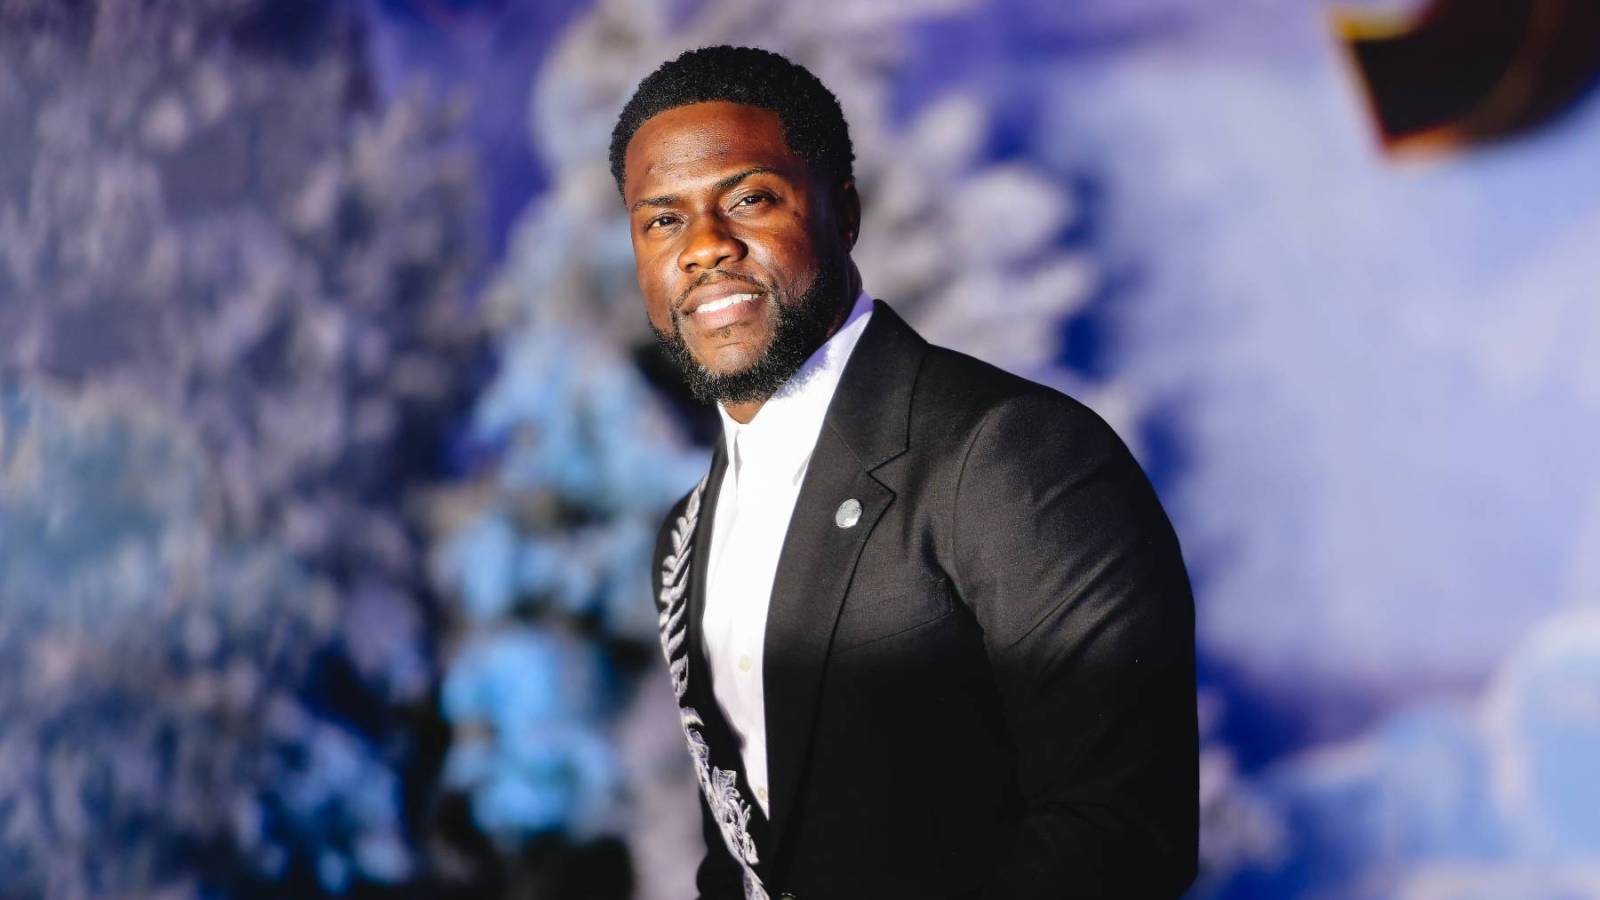 Kevin Hart Will Get His Flowers With Mark Twain Prize for American Humor